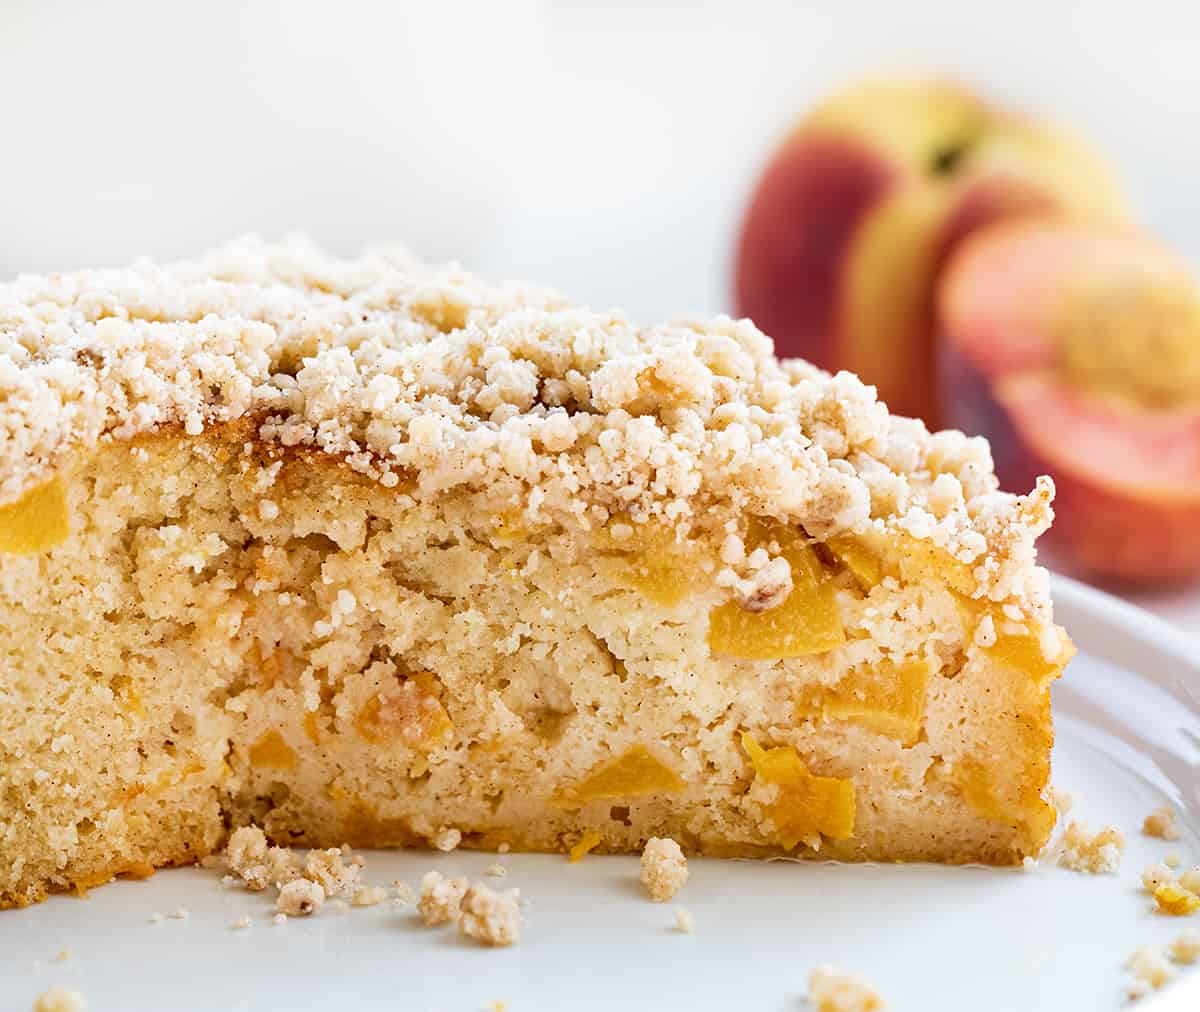 Cut Into Peach Cake Showing Inside Texture.